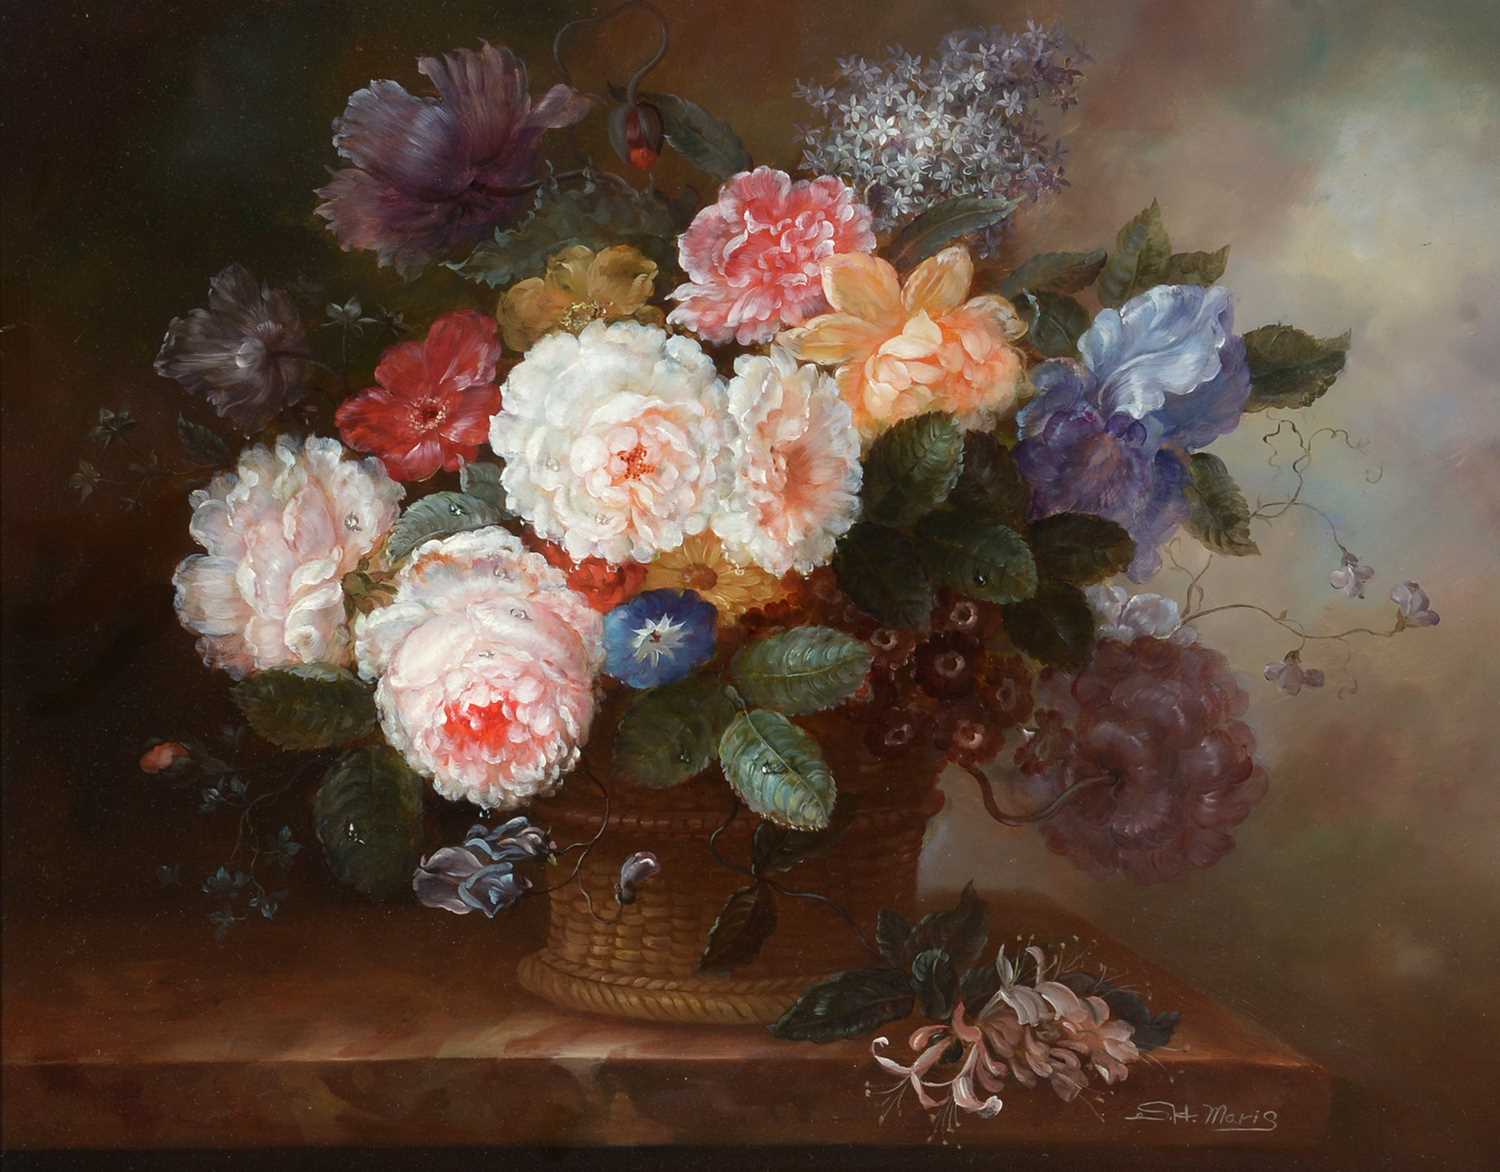 Lot 125 - S. H. Maris - Still Life with Dewy Garden Blossoms | oil